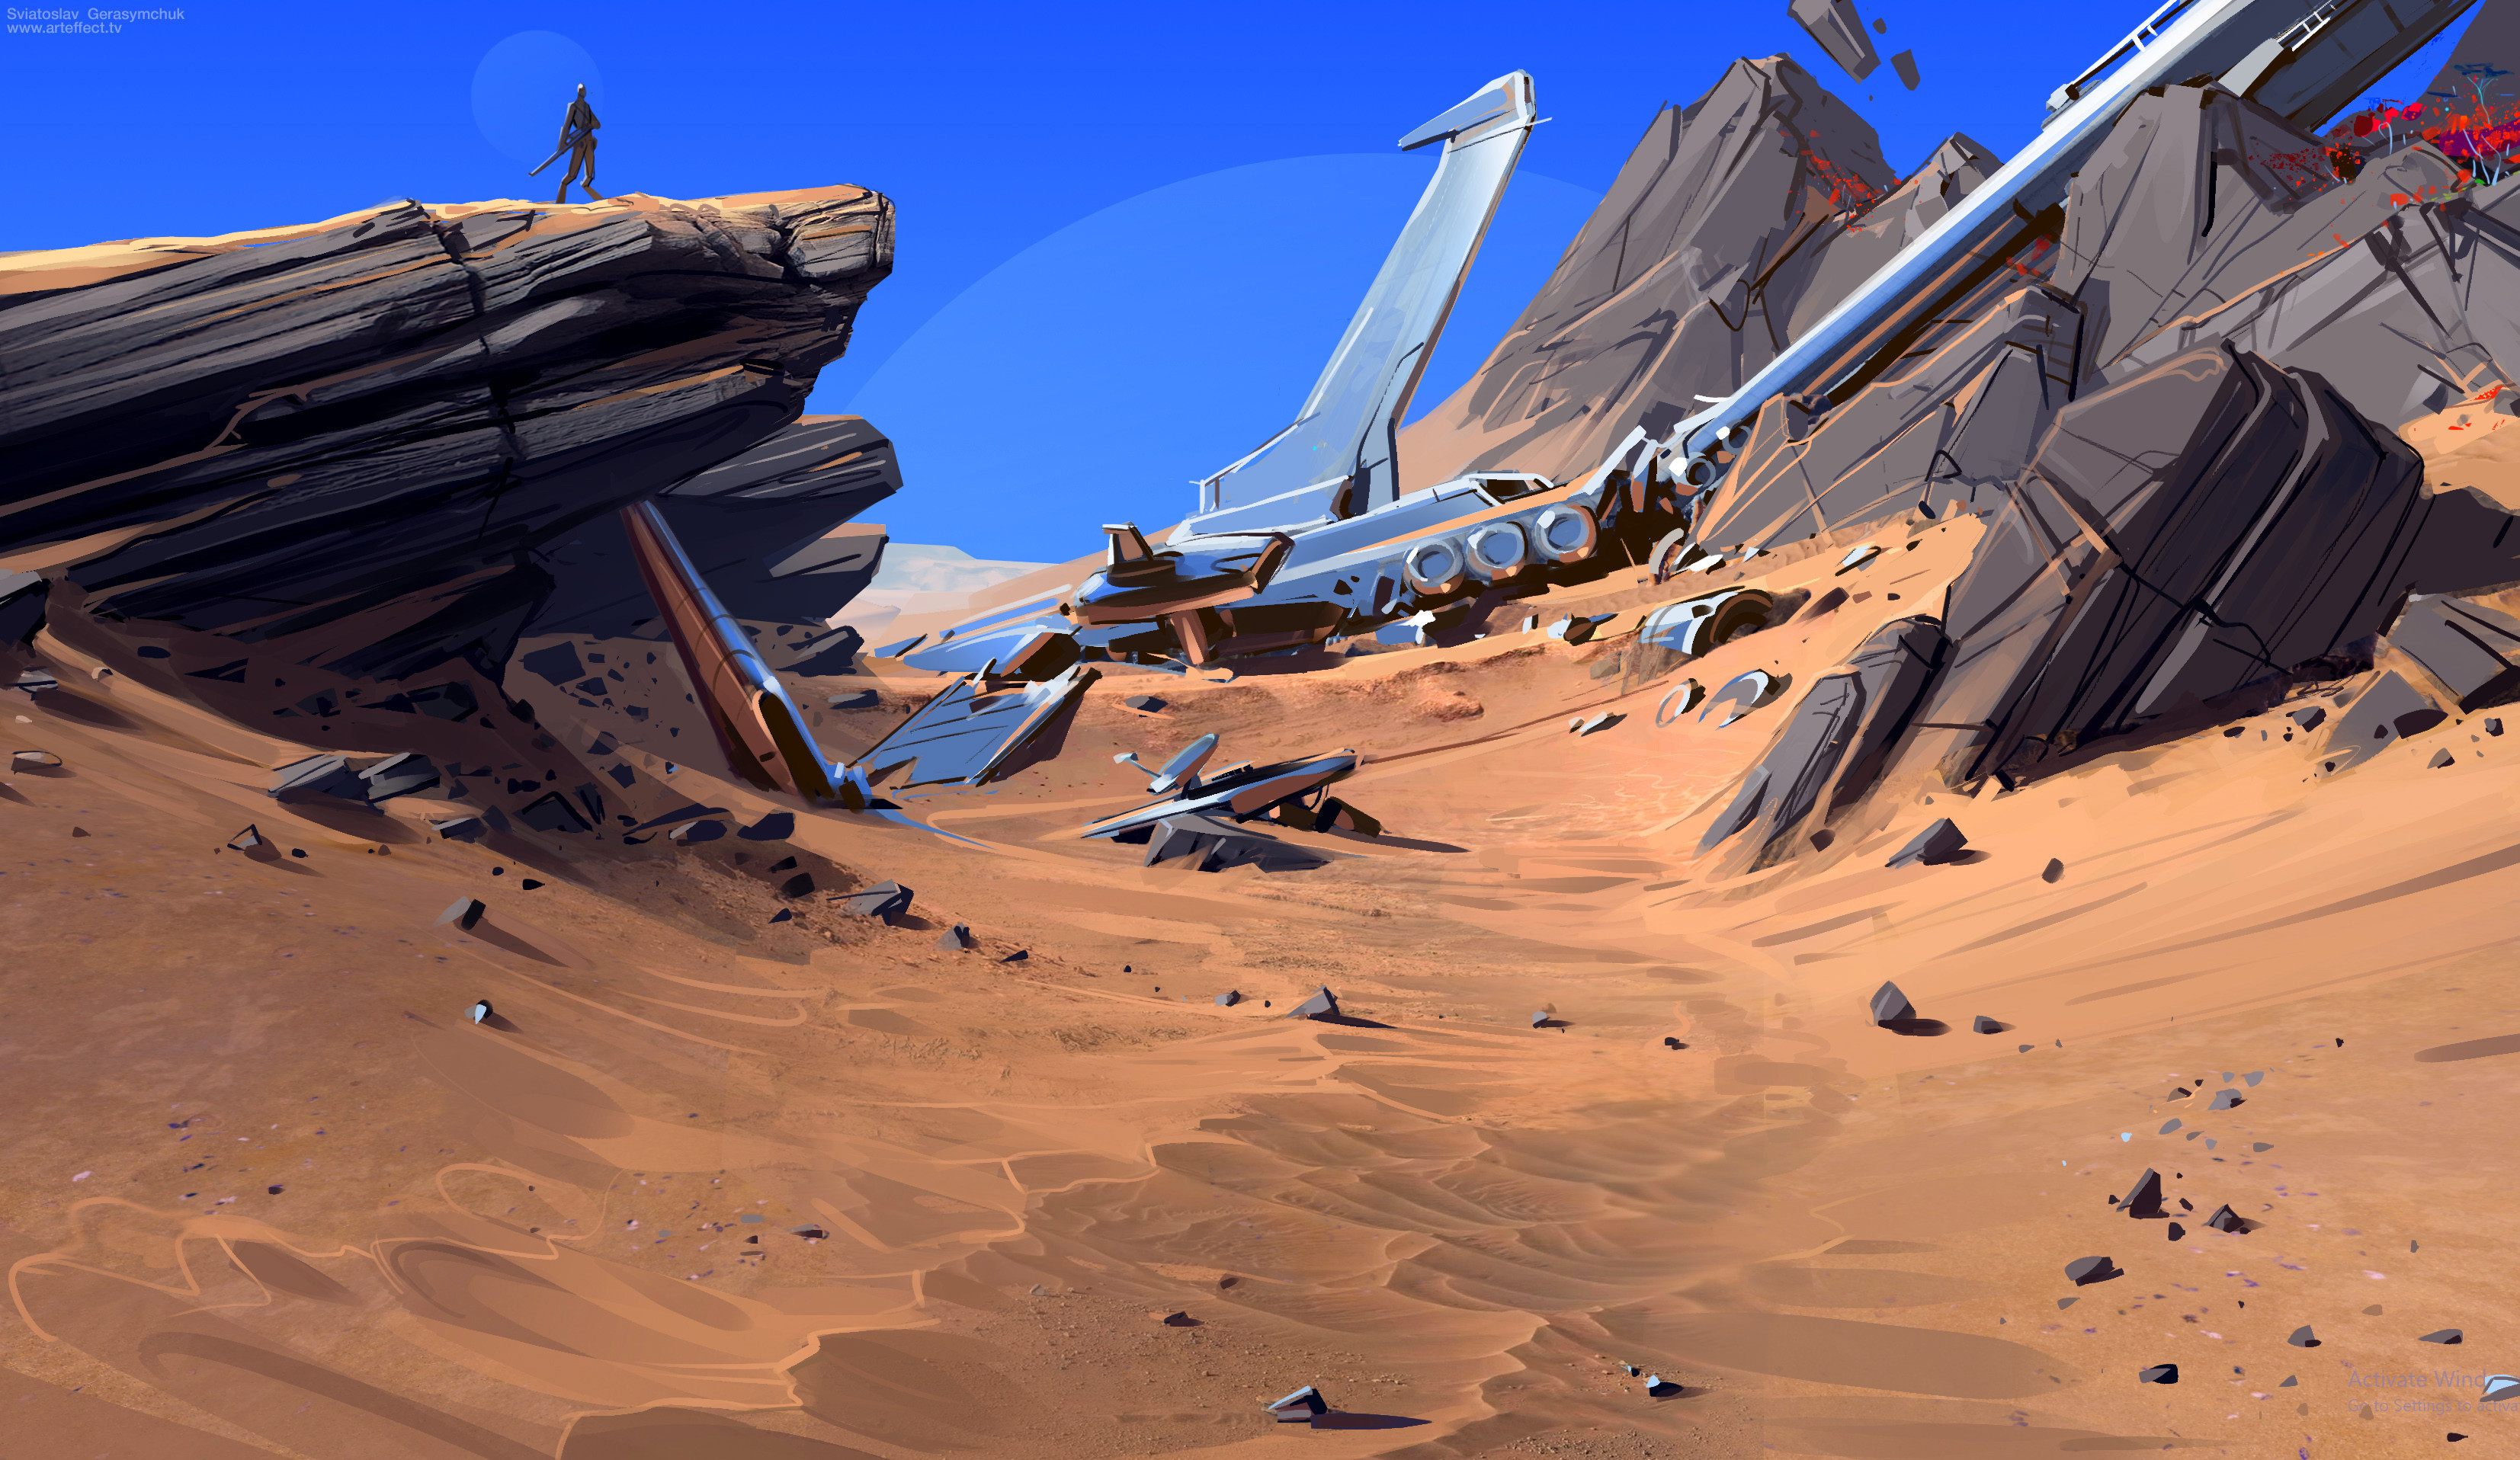 Landscape of Mars with a crashed spaceship